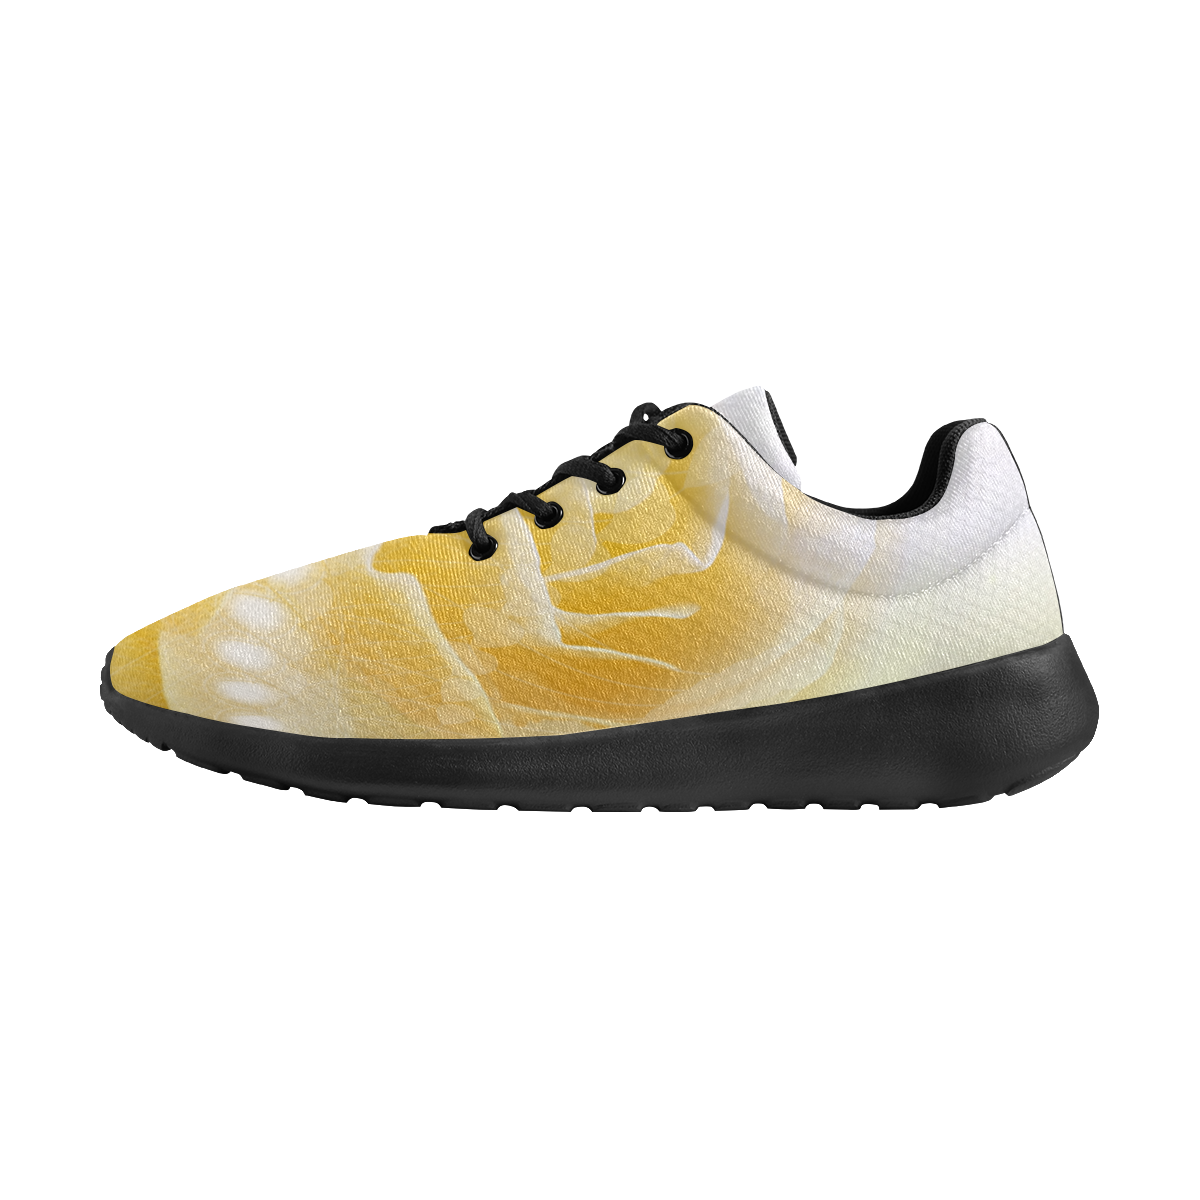 Soft yellow roses Women's Athletic Shoes (Model 0200)